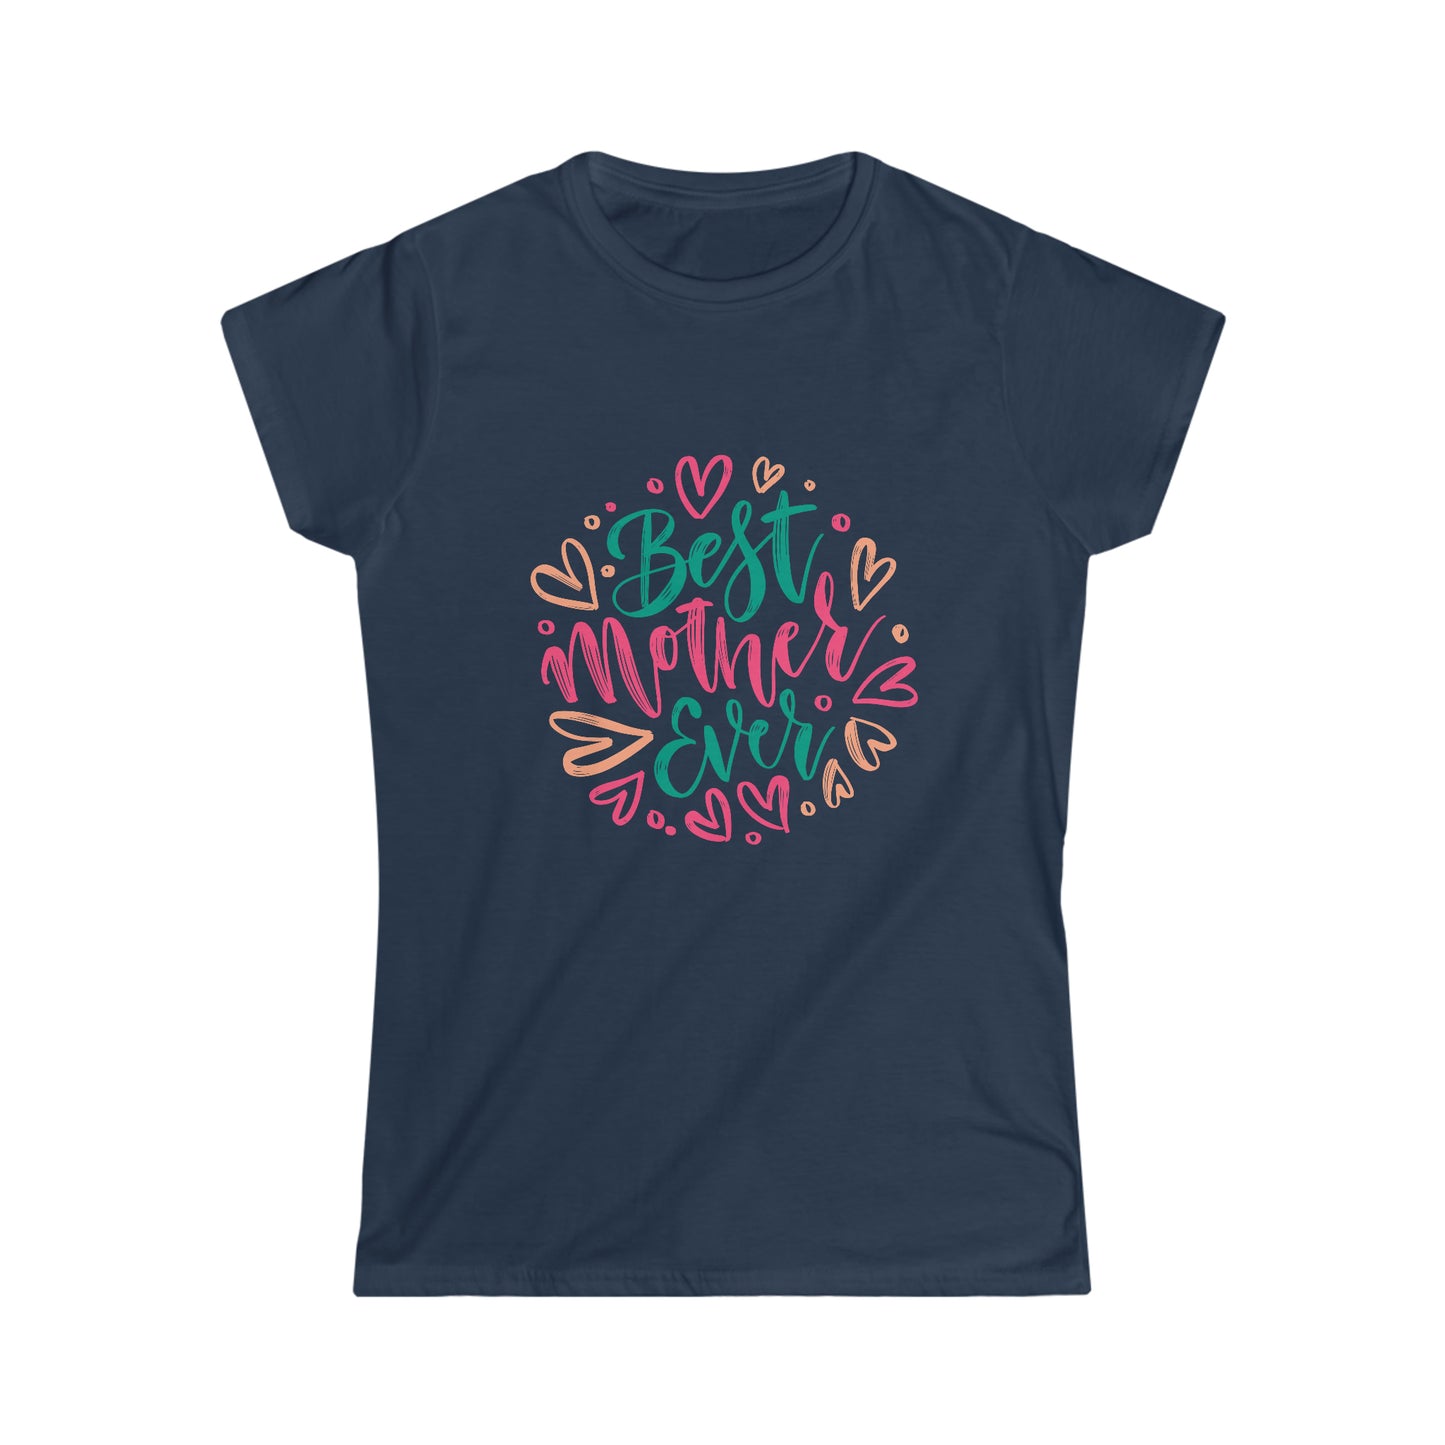 Whether you're celebrating Mother's Day or just want to let her know how much she means to you, our Best Mother Ever navy t-shirt is sure to bring a smile to her face.